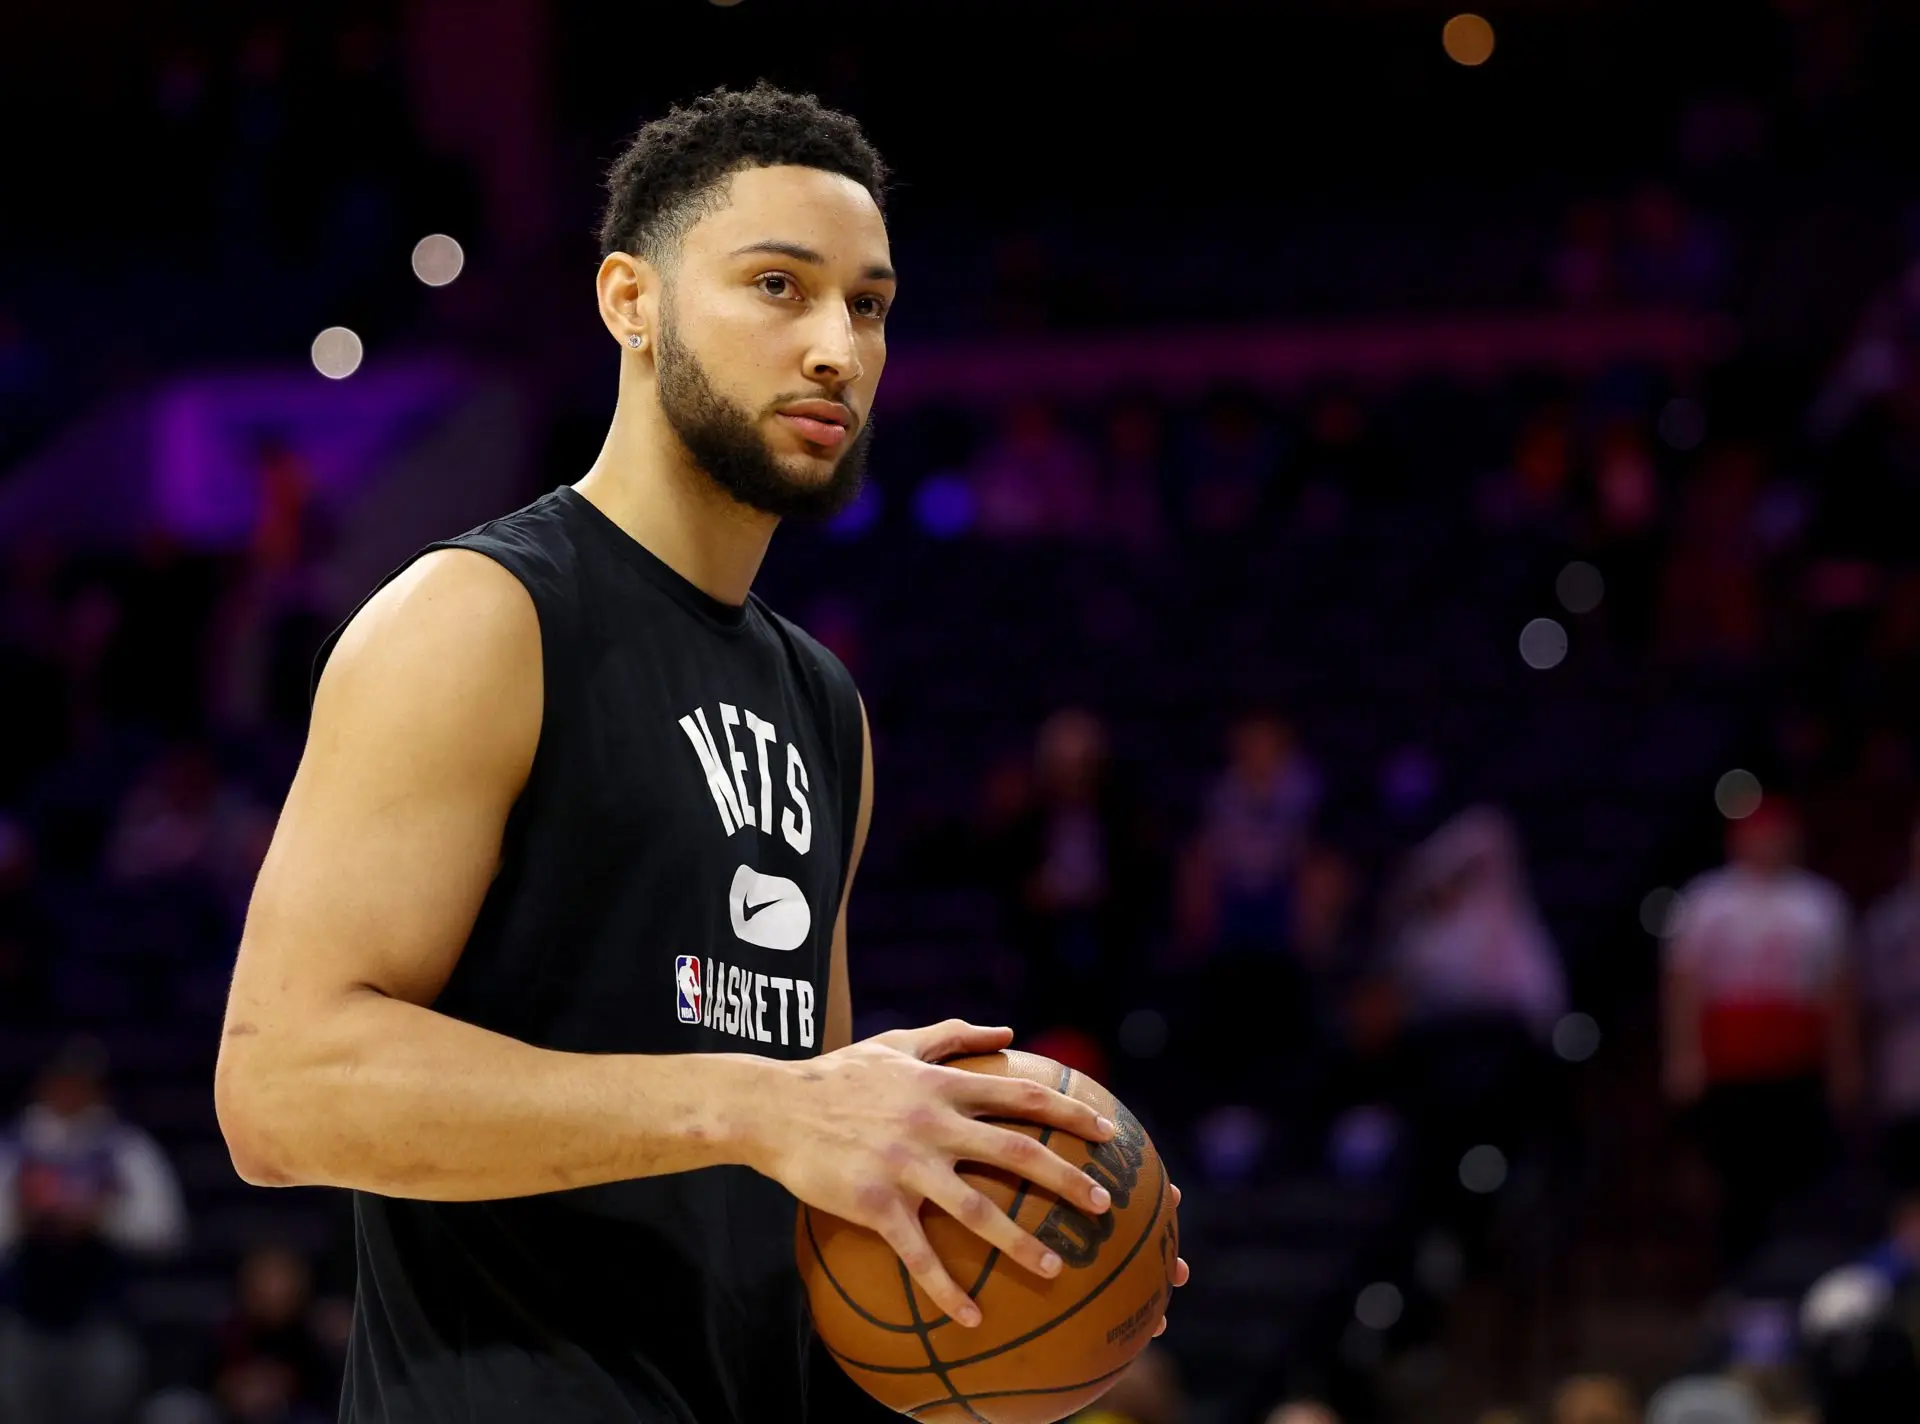 Ben Simmons spotted out in New York with stunning Mexican actress